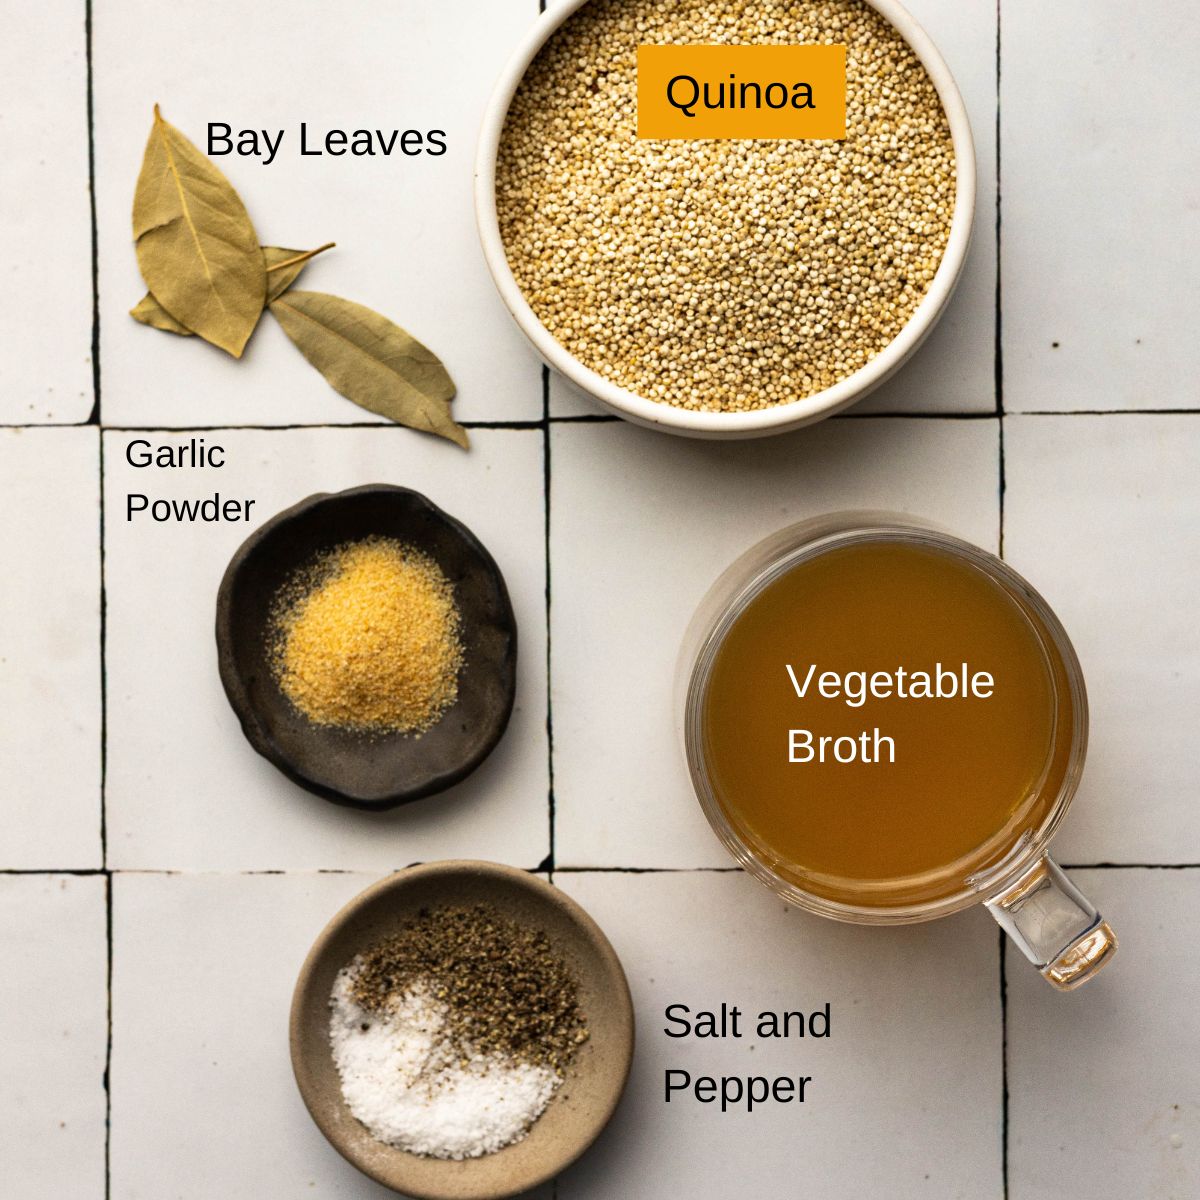 Ingredients for quinoa, just before cooking the quinoa.